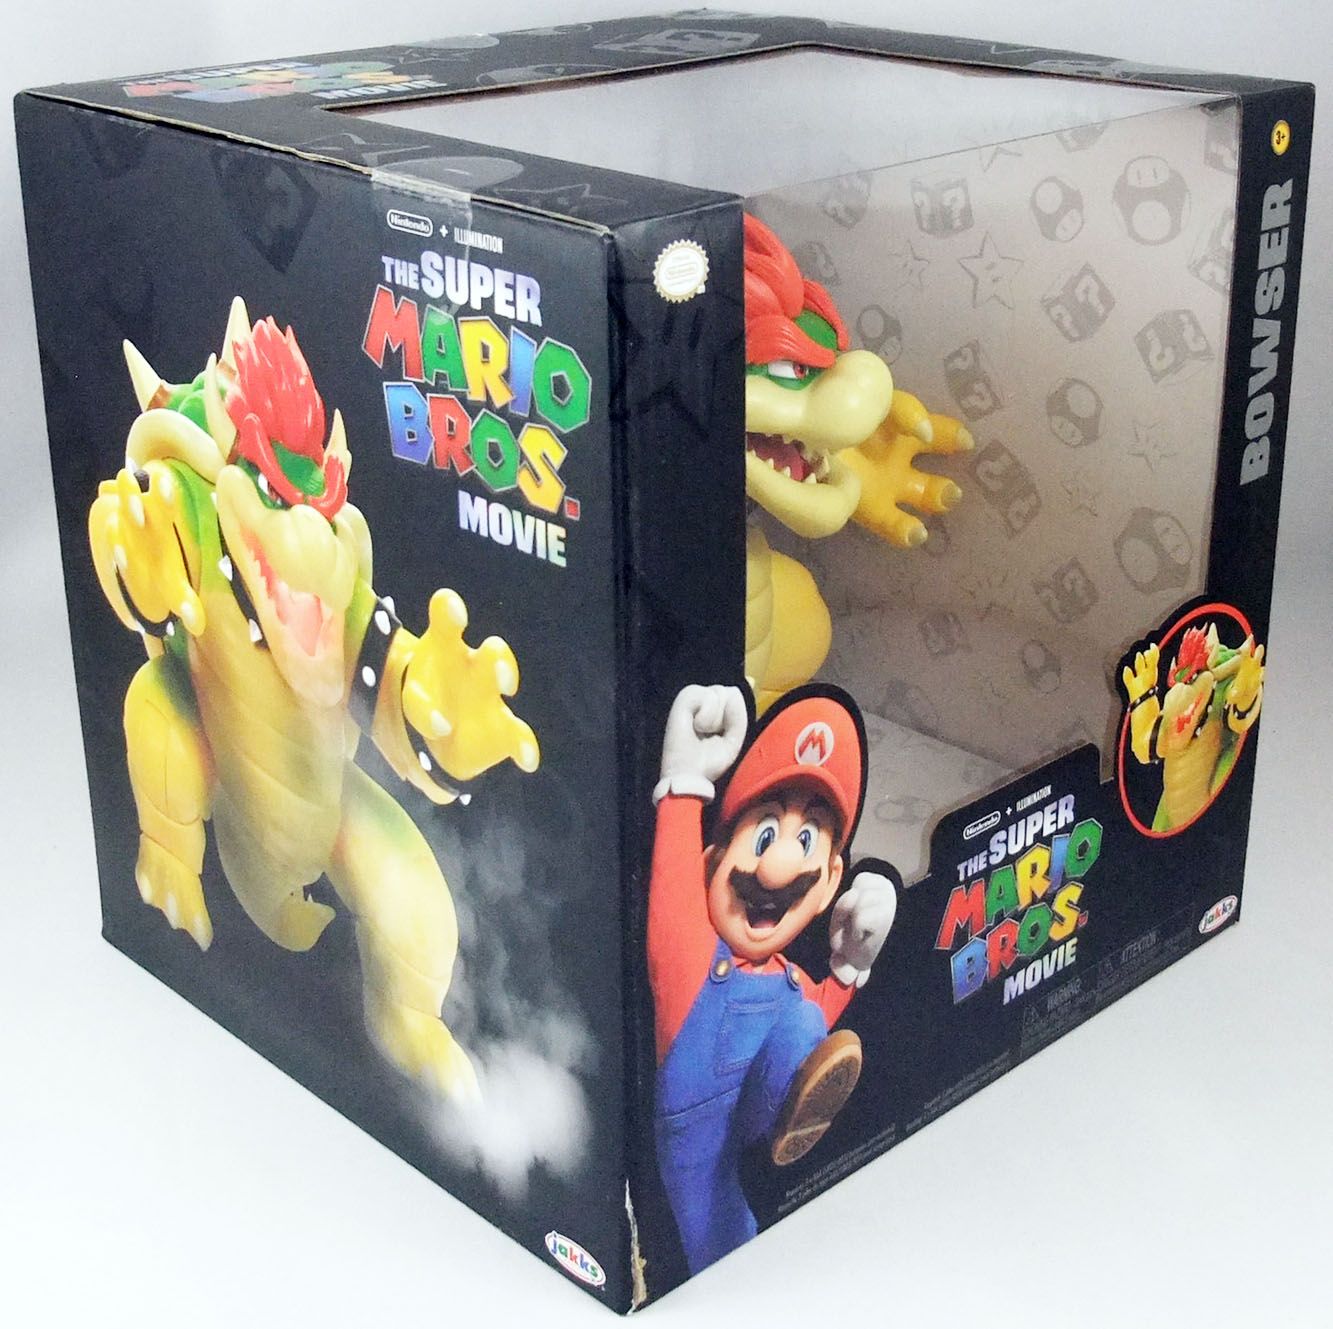 bowser) Super Mario Bros Figurines d'action Jouets Grande Taille